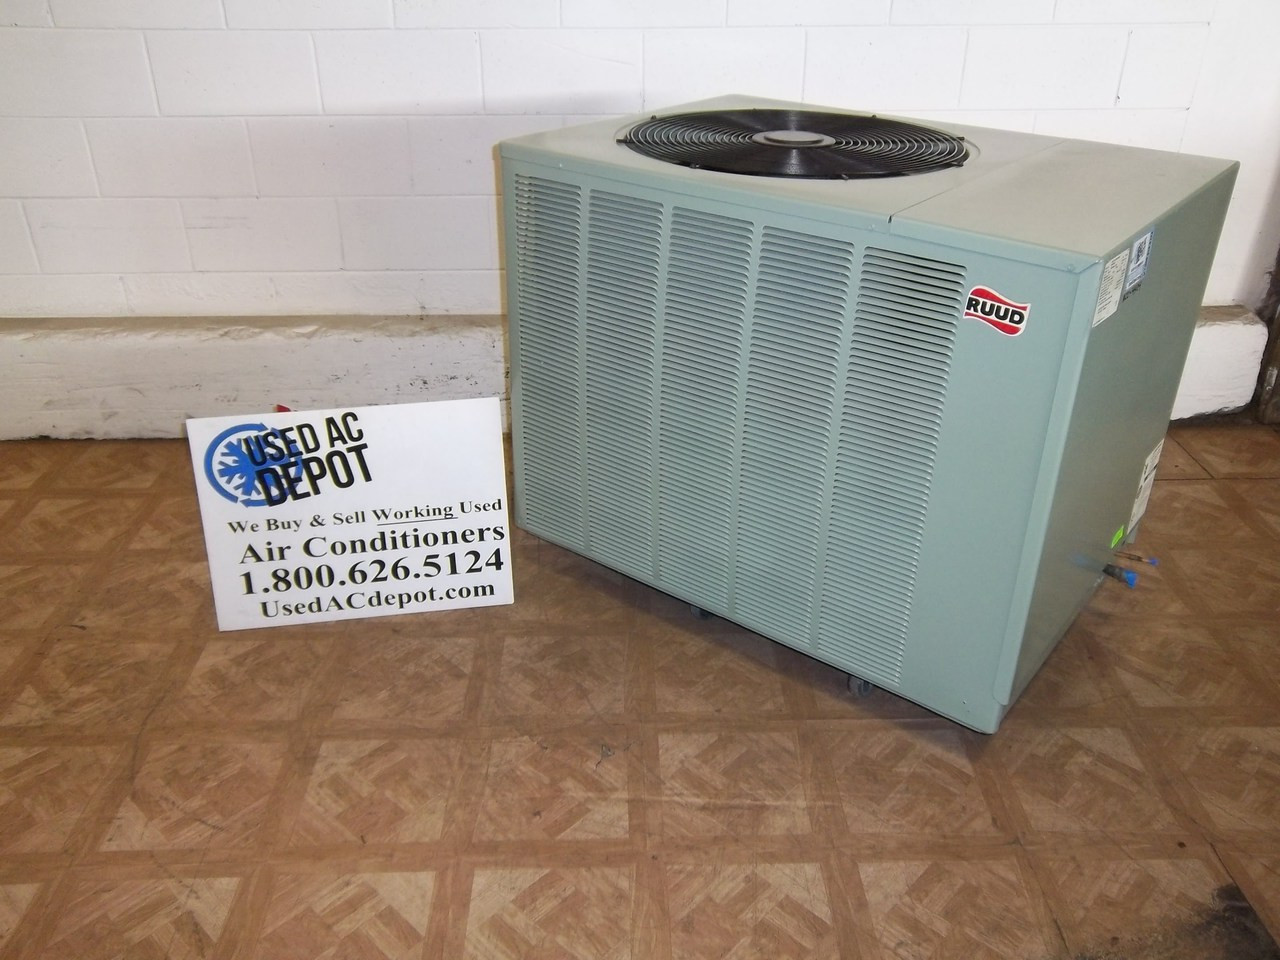 Are Ruud Air Conditioners Good / Ruud Air Conditioner Reviews Ac Price